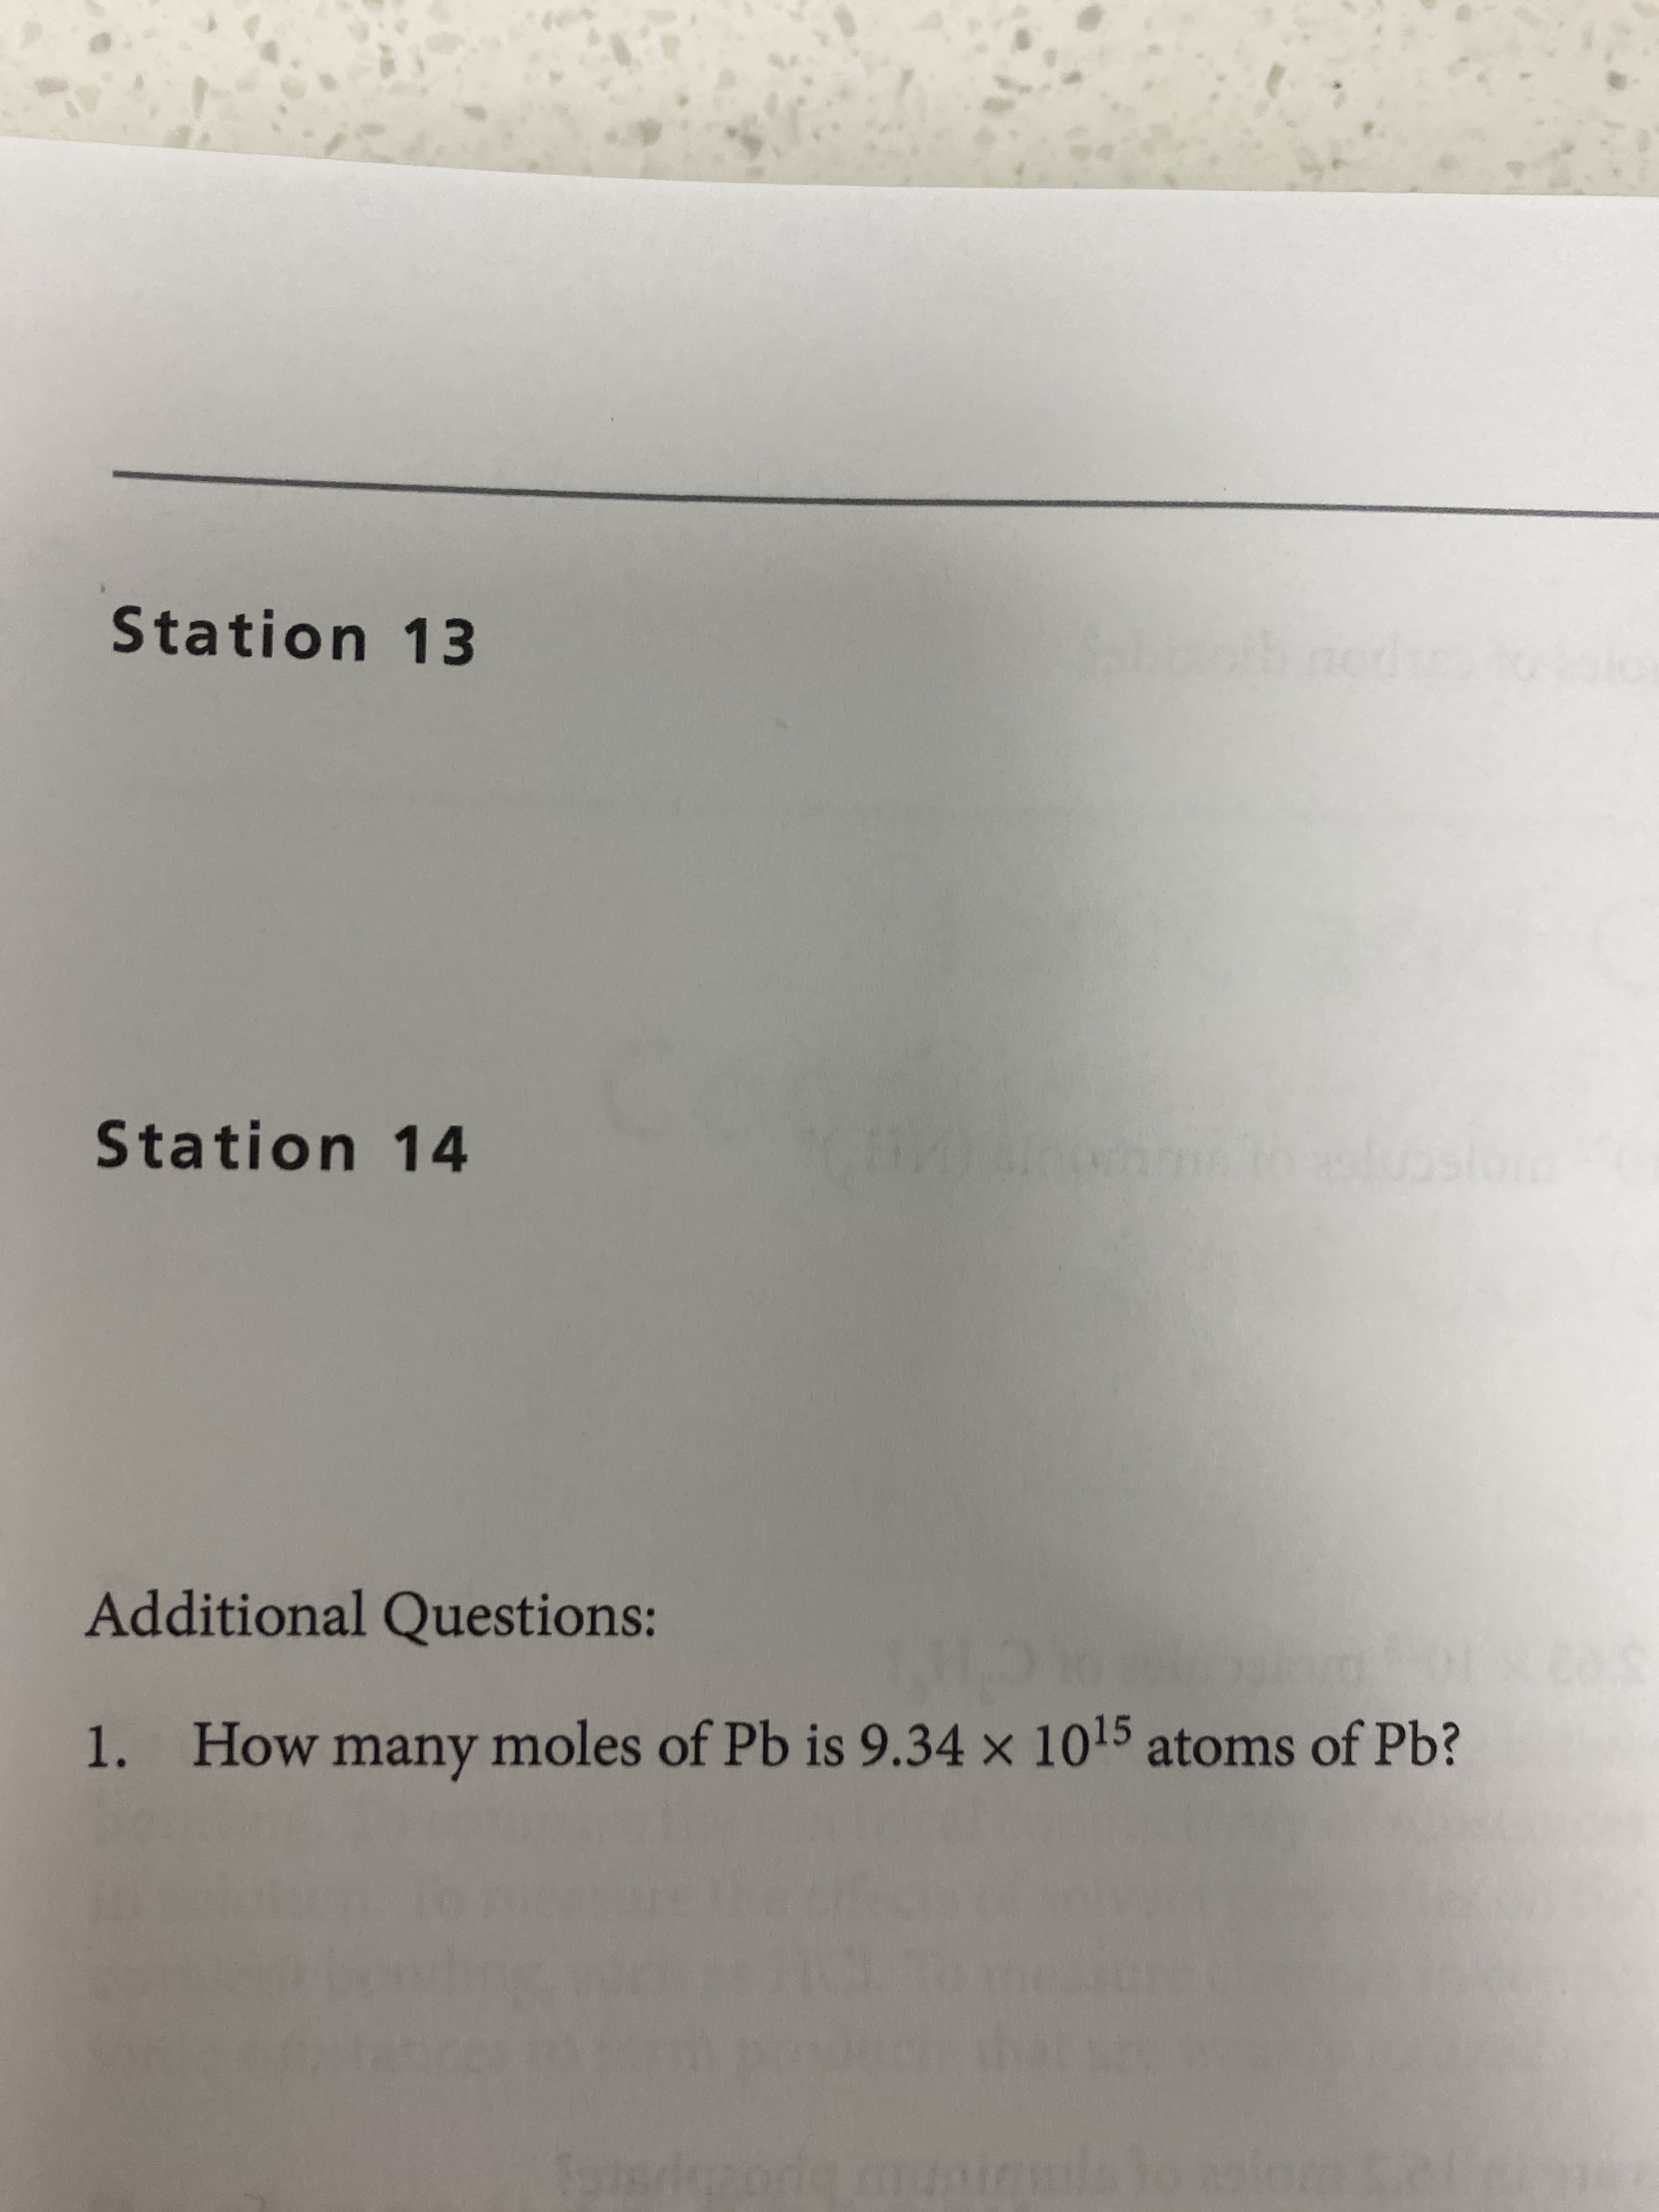 Station 13
Station 14
Additional Questions:
1. How many moles of Pb is 9.34 x 1015 atoms of Pb?
